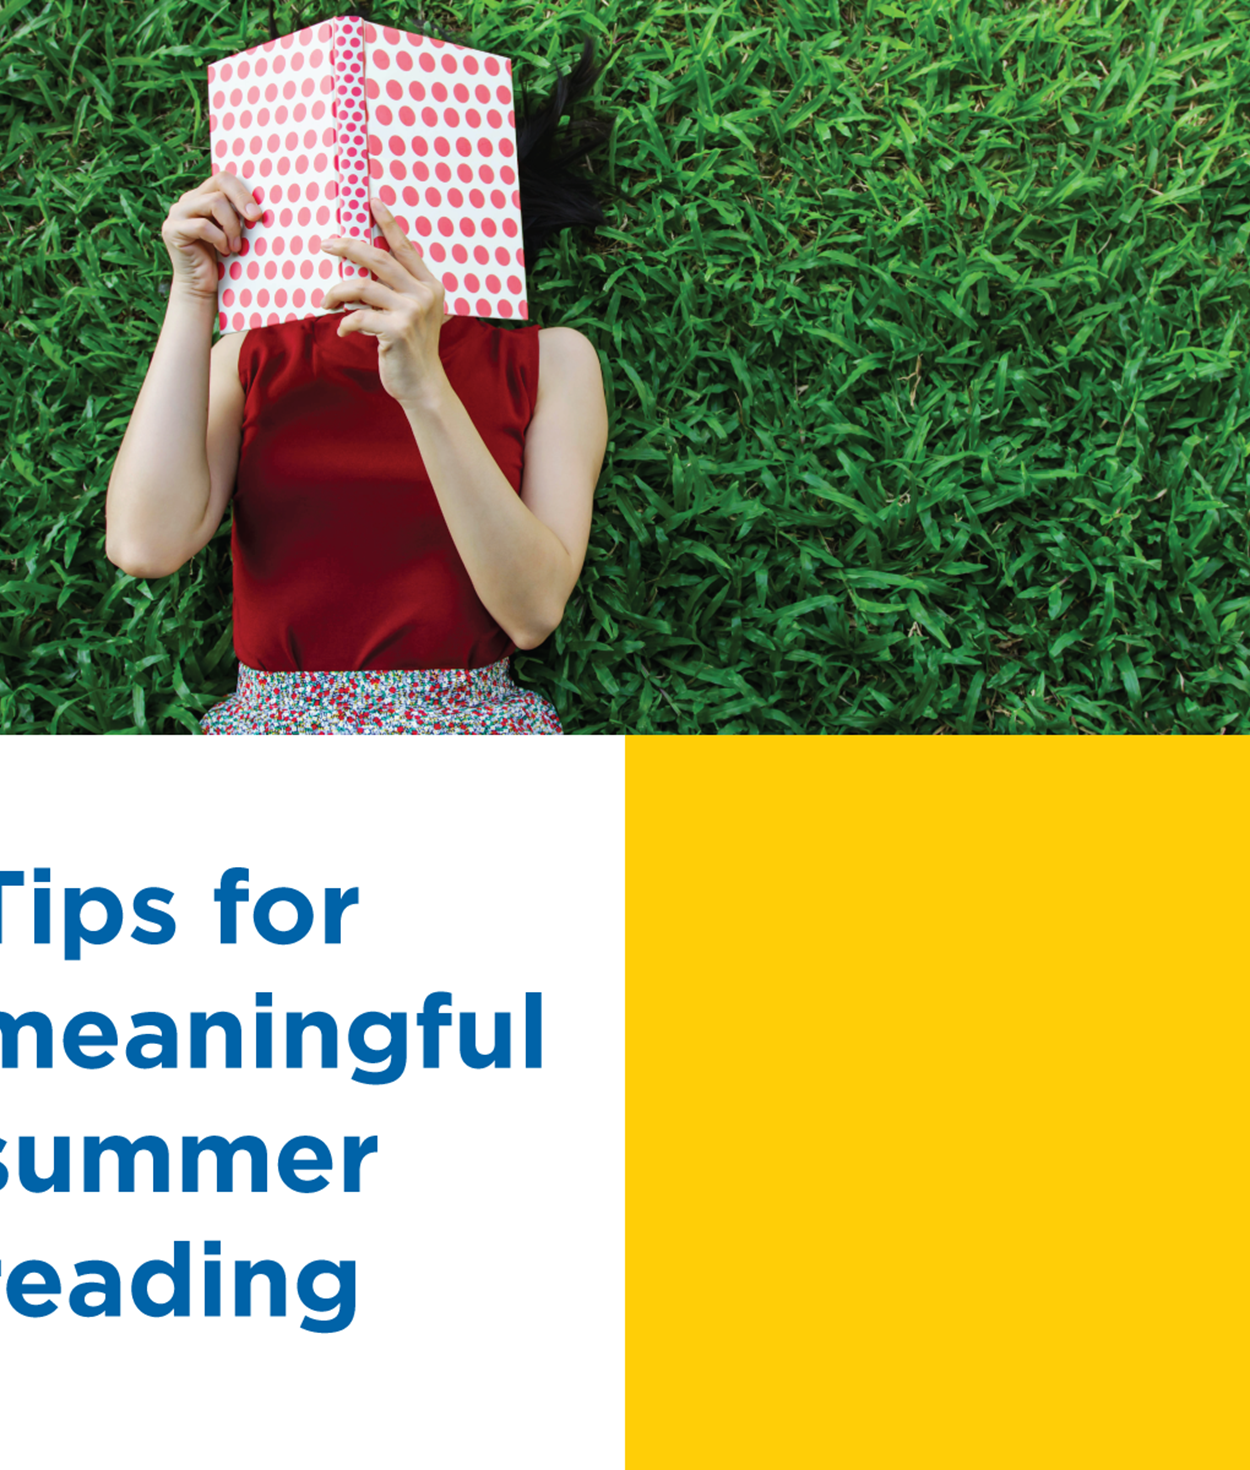 Tips for meaningful summer reading.